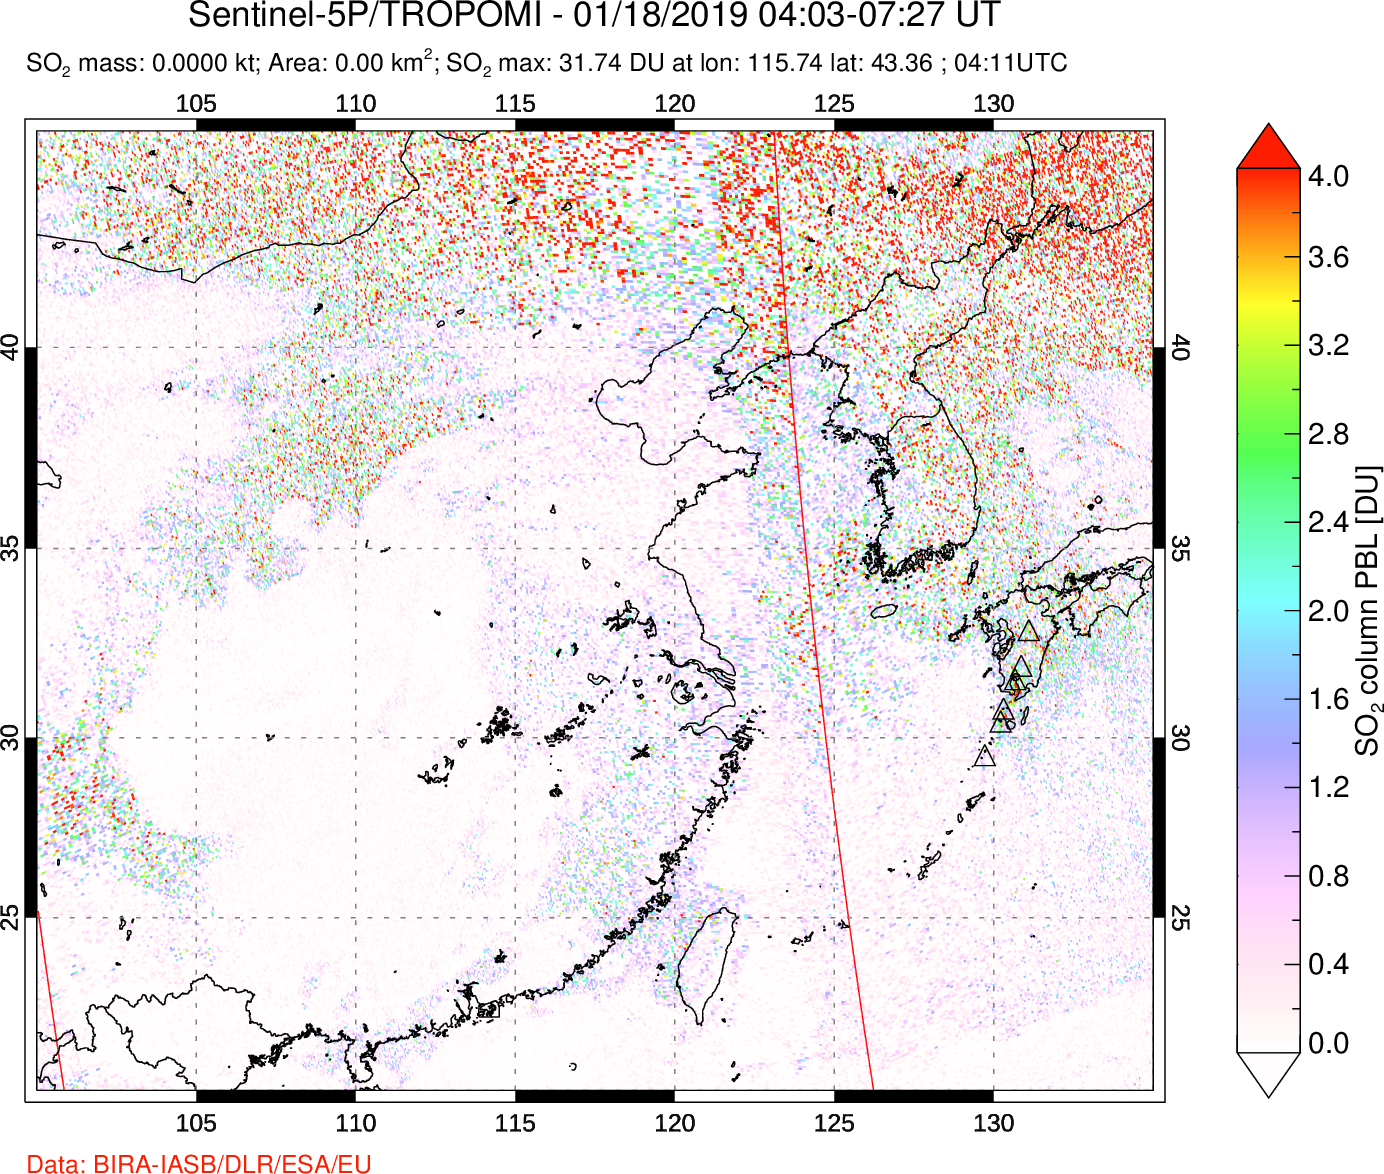 A sulfur dioxide image over Eastern China on Jan 18, 2019.